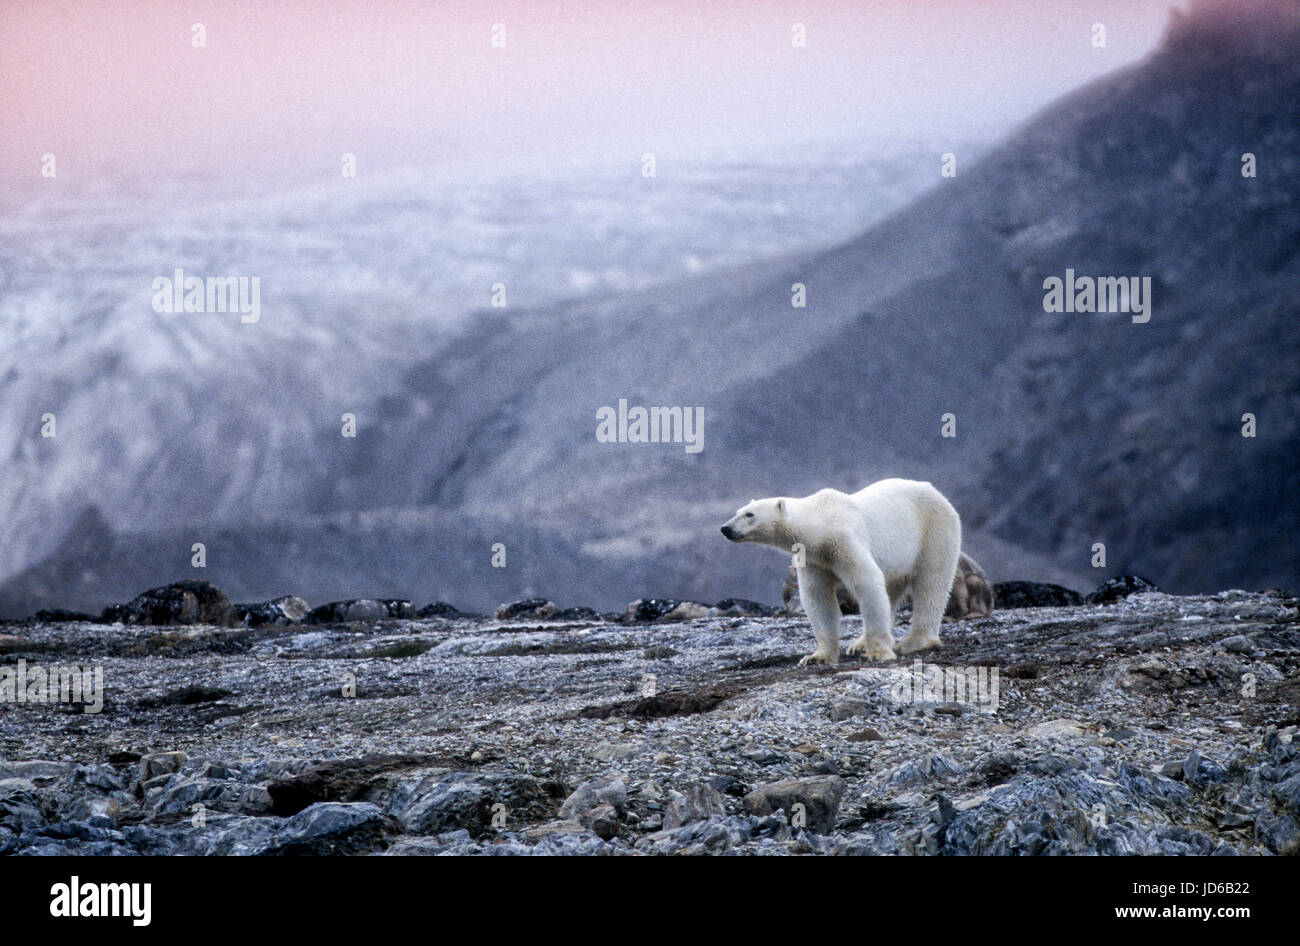 Polar Bear, Spitzbergen or Svalbard, Norway, trapped on land by melting sea ice, starvation a possibility when unable to hunt seals. Climate change. Stock Photo